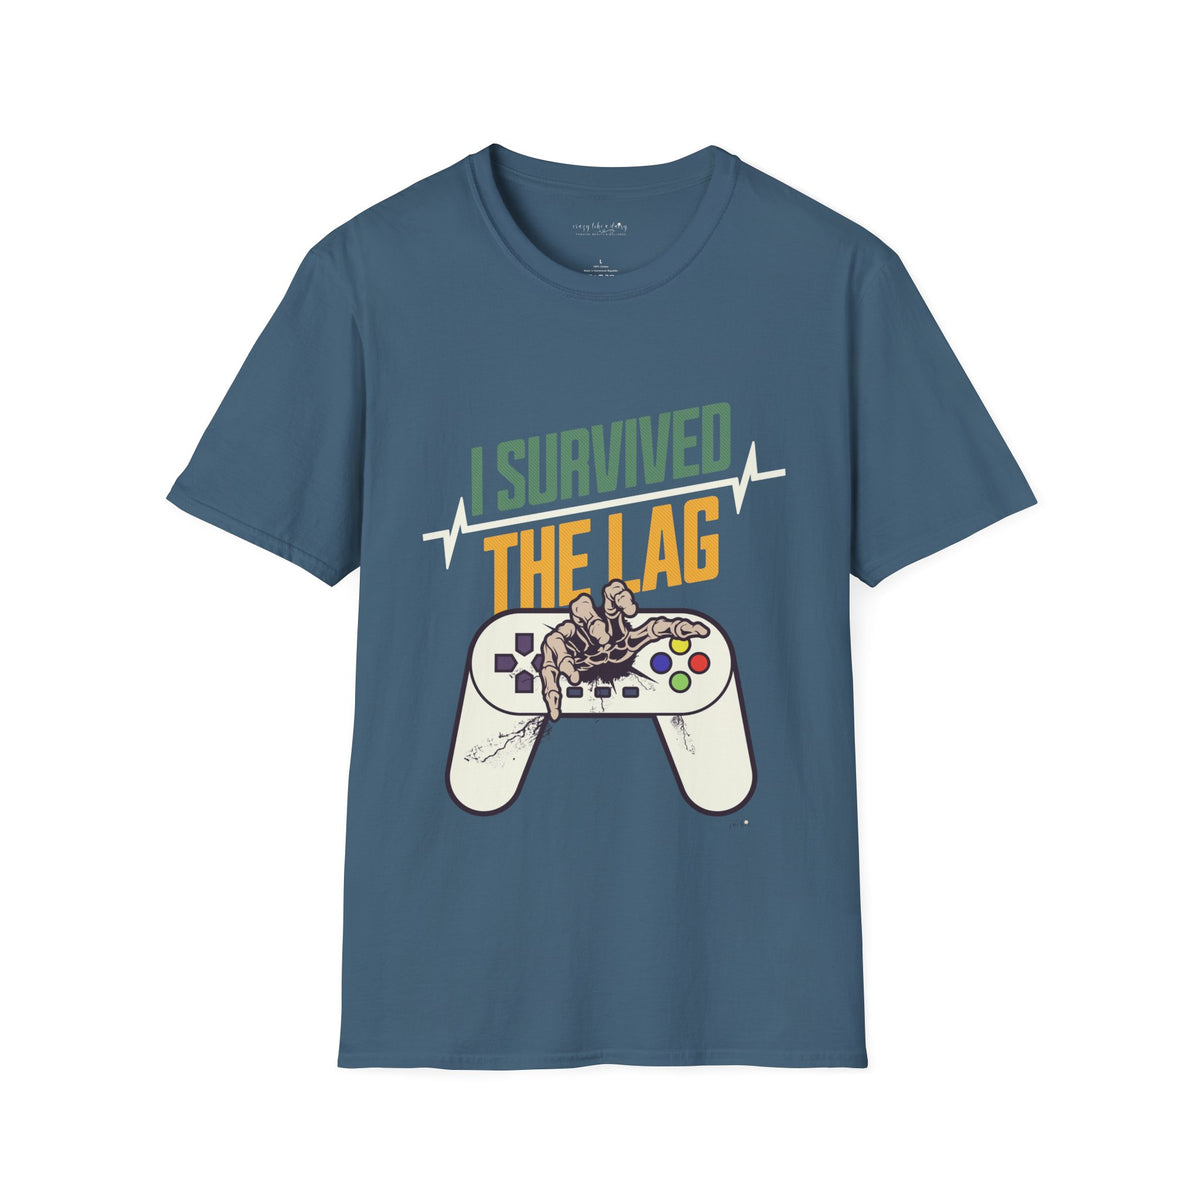 'I survived the lag' - Unisex Softstyle T-Shirt